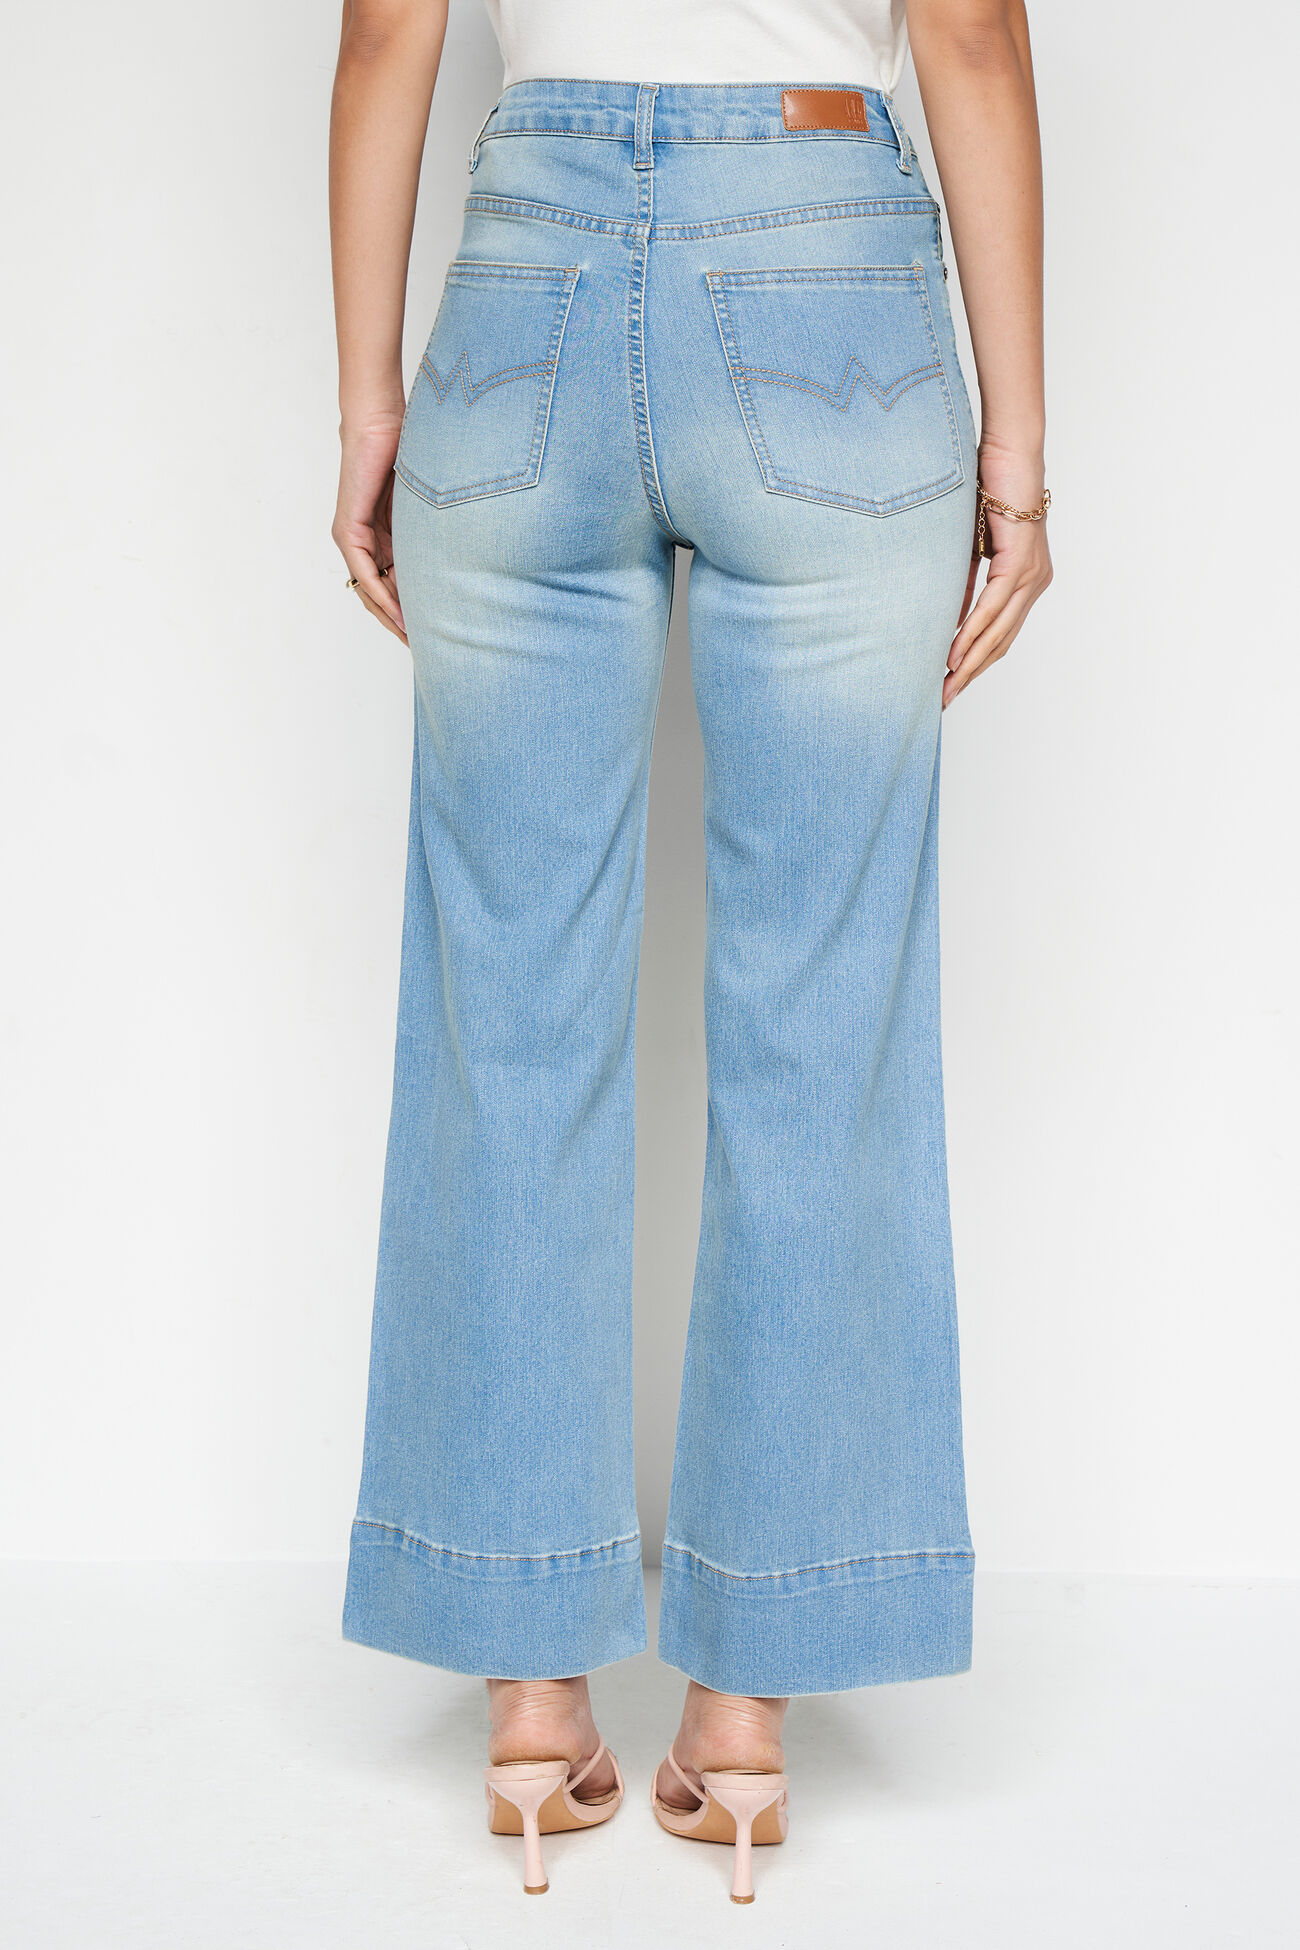 The Fit And Flare Denim, Light Blue, image 4